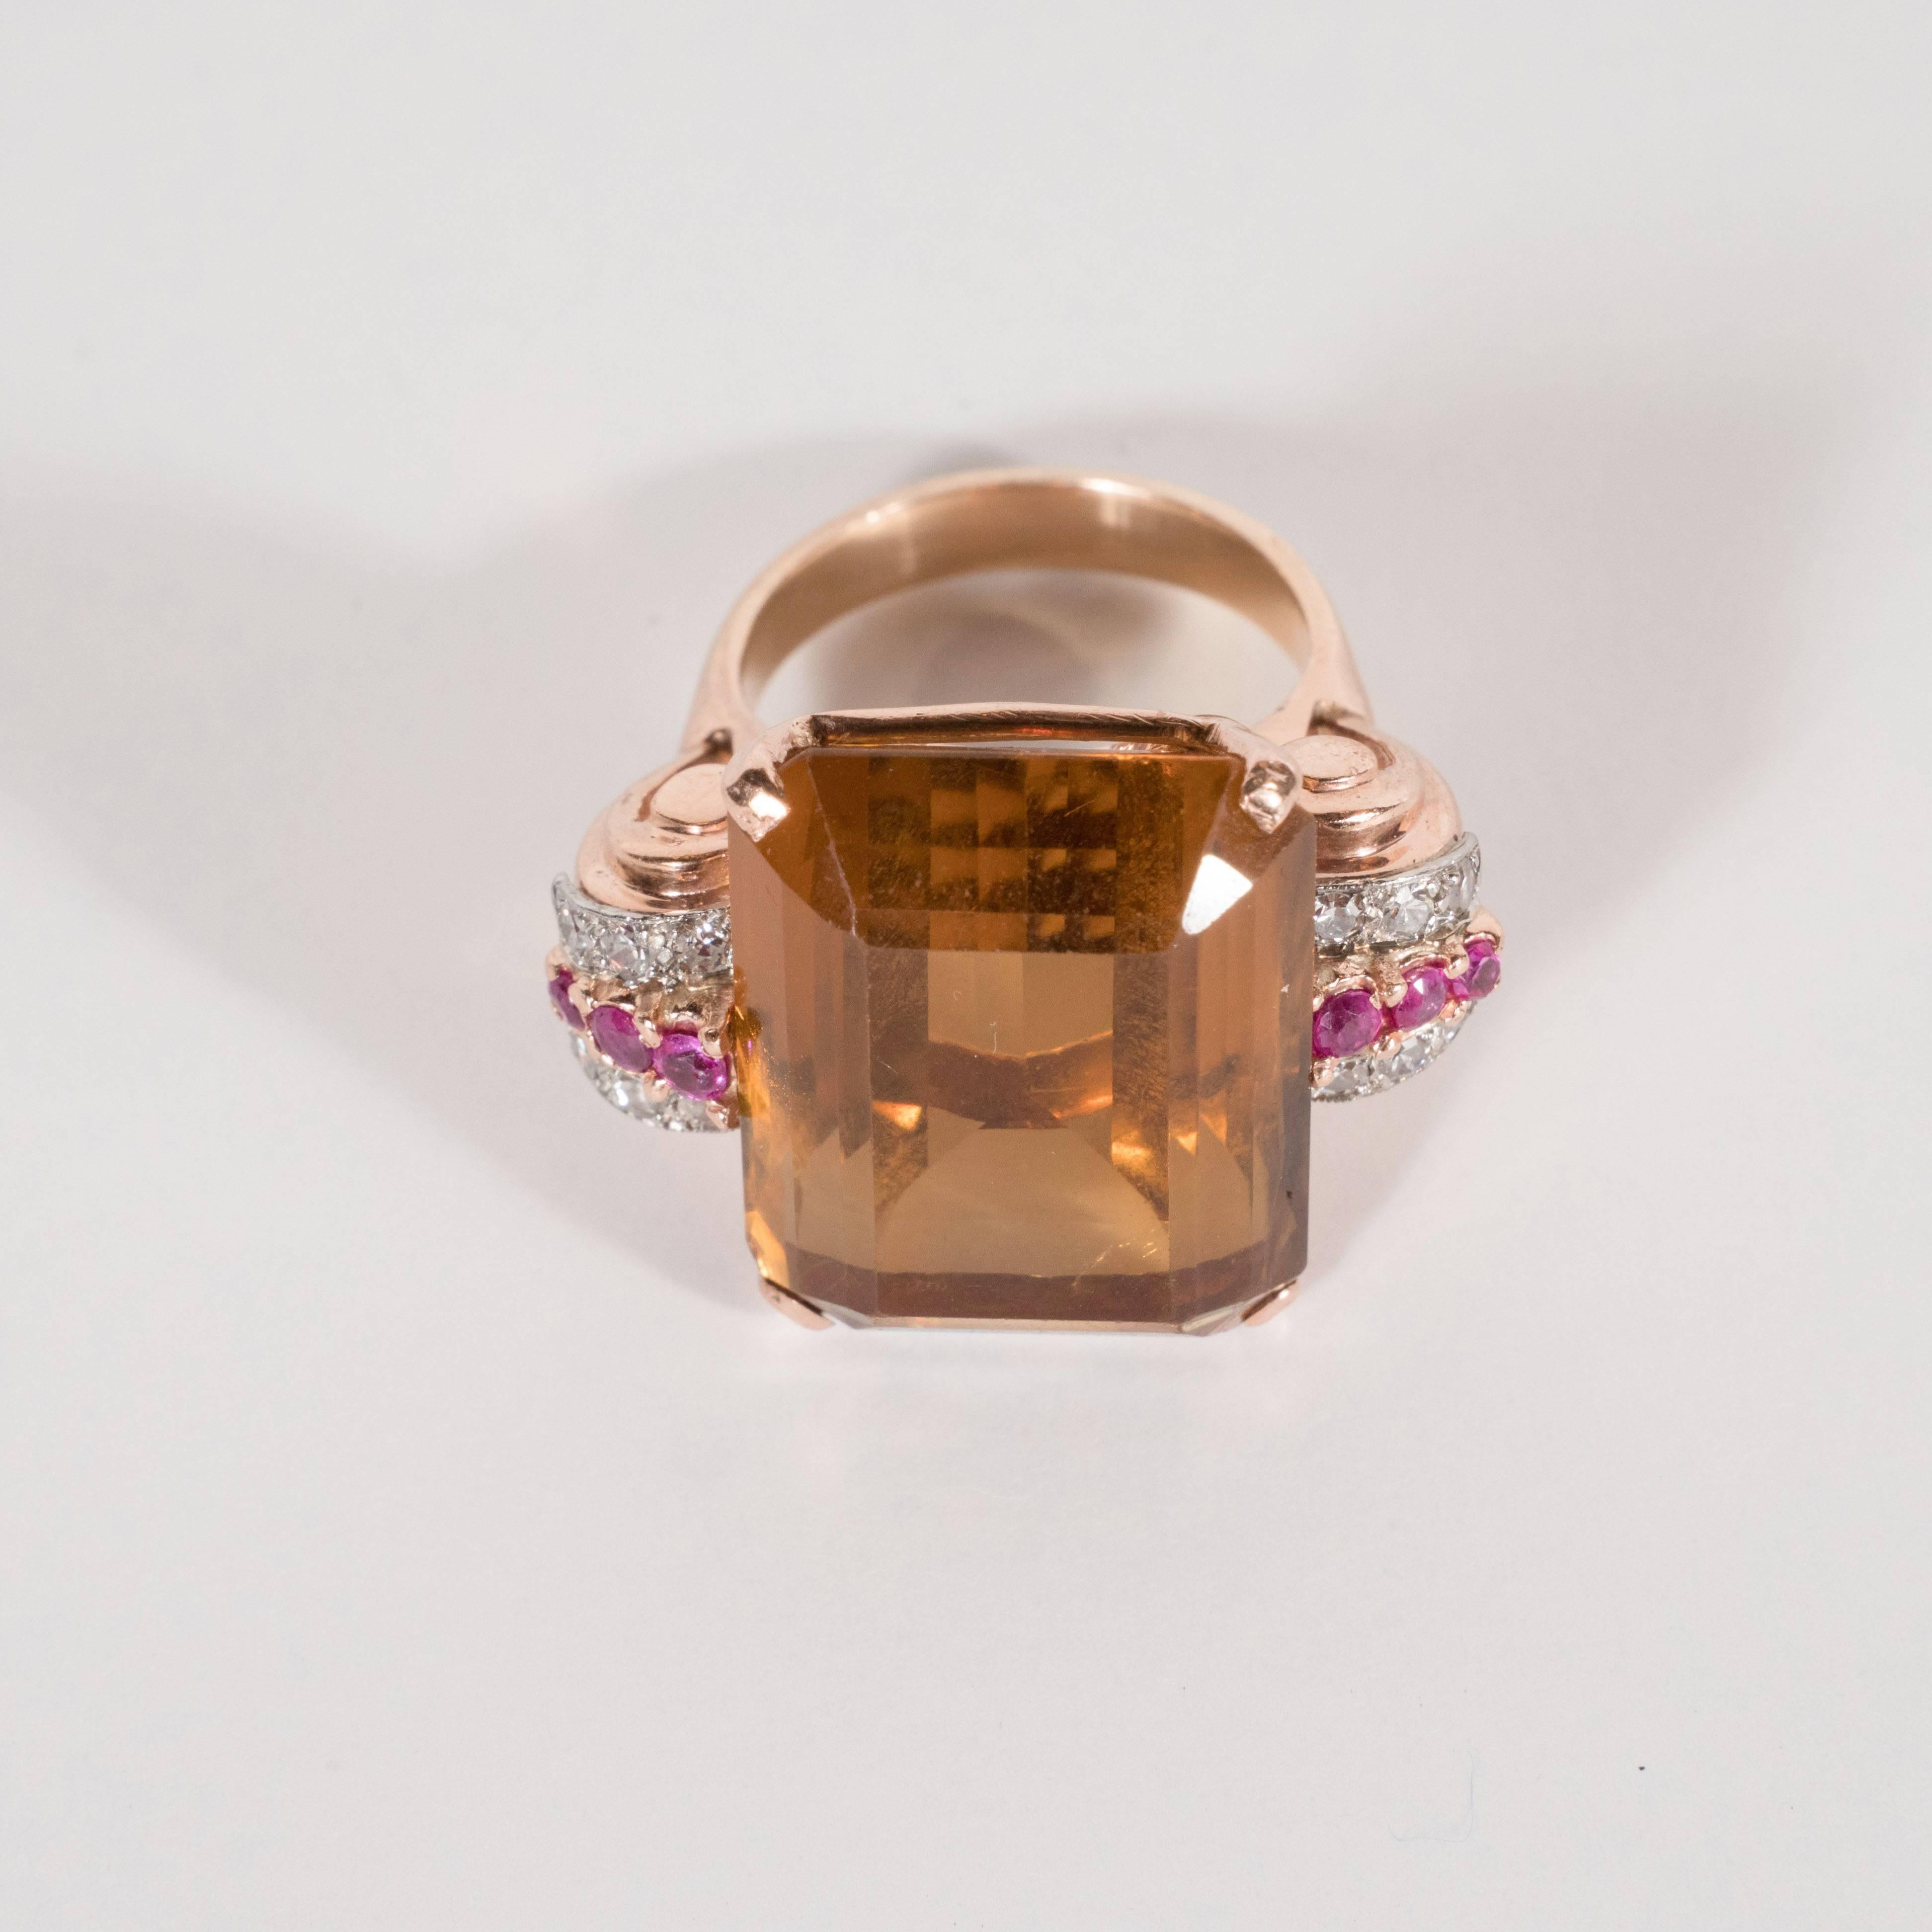 This magnificent ring features a large emerald cut topaz (approximately 25 carats) in a rich amber hue flanked by two scroll form shoulders holding 20 points of single cut diamonds as well as 20 points of brilliant cut rubies.  The diamonds exhibit